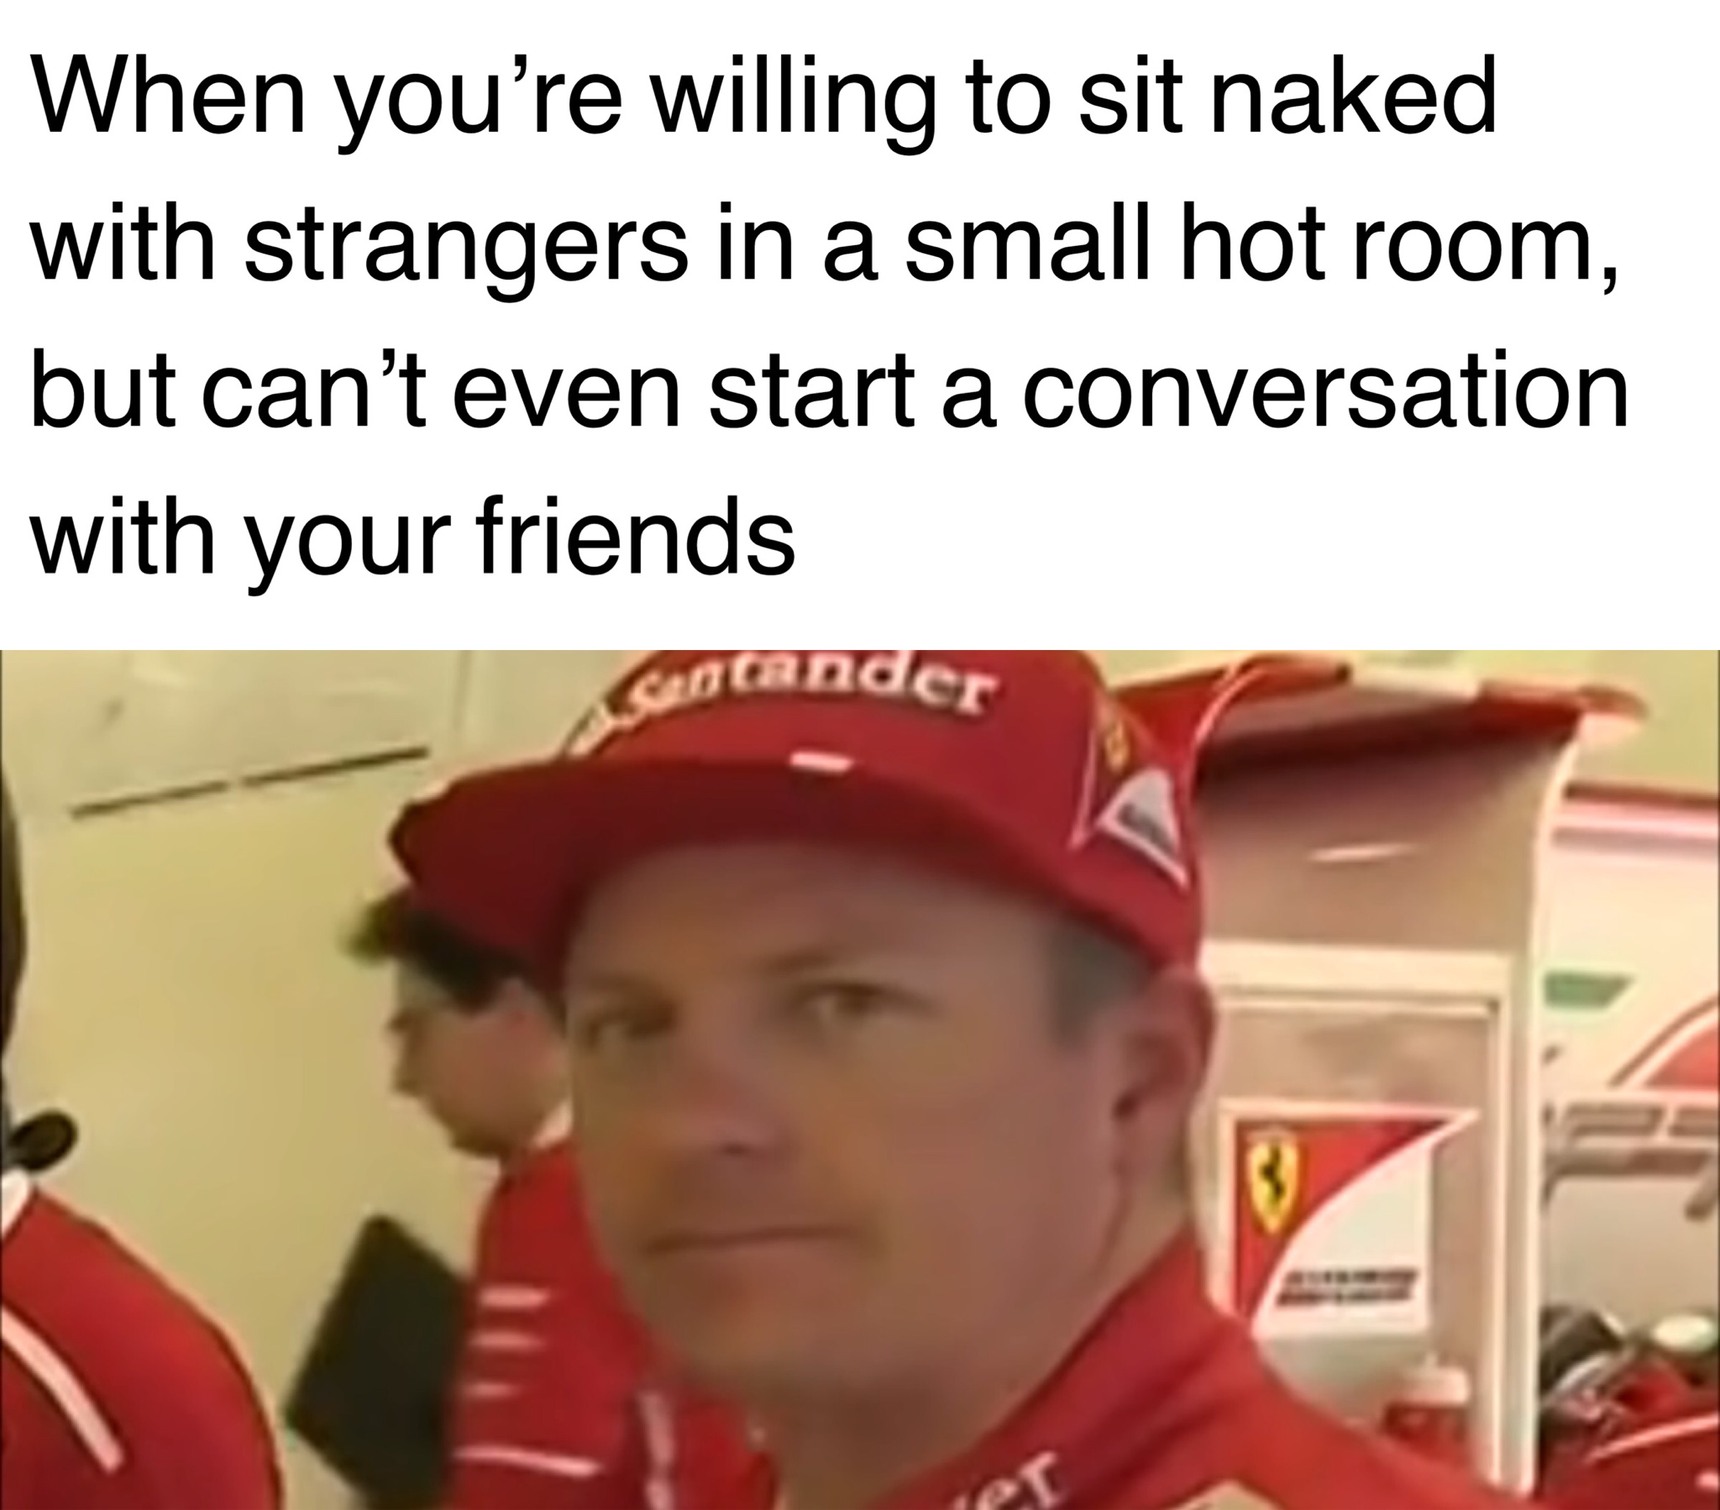 That's Kimi Räikkönen and this meme is about Finland if you don't get it